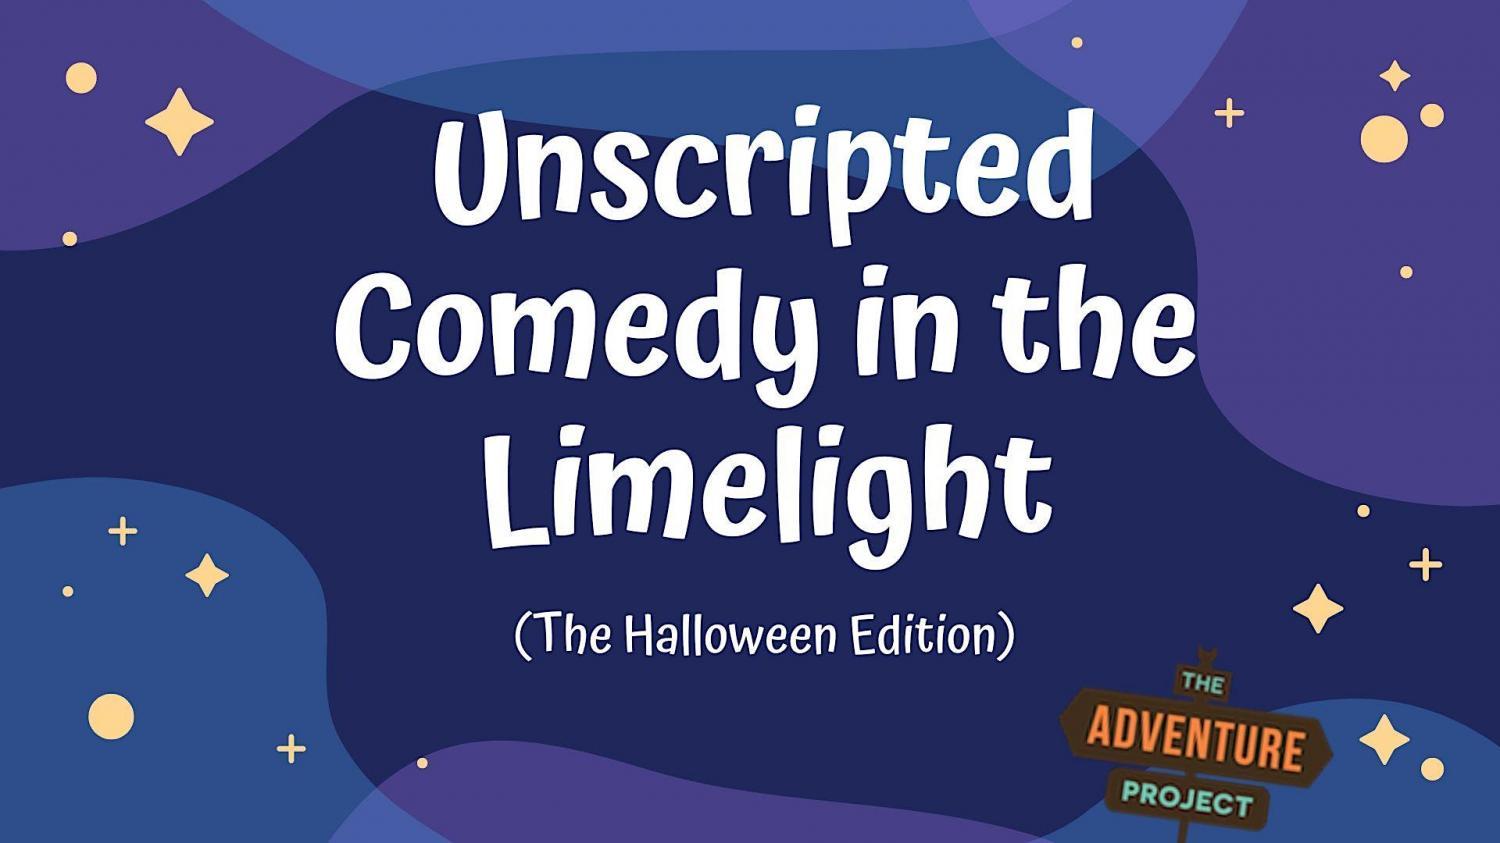 Unscripted Comedy in the Limelight - the Halloween Edition
Sun Oct 23, 7:00 PM - Sun Oct 23, 7:00 PM
in 4 days